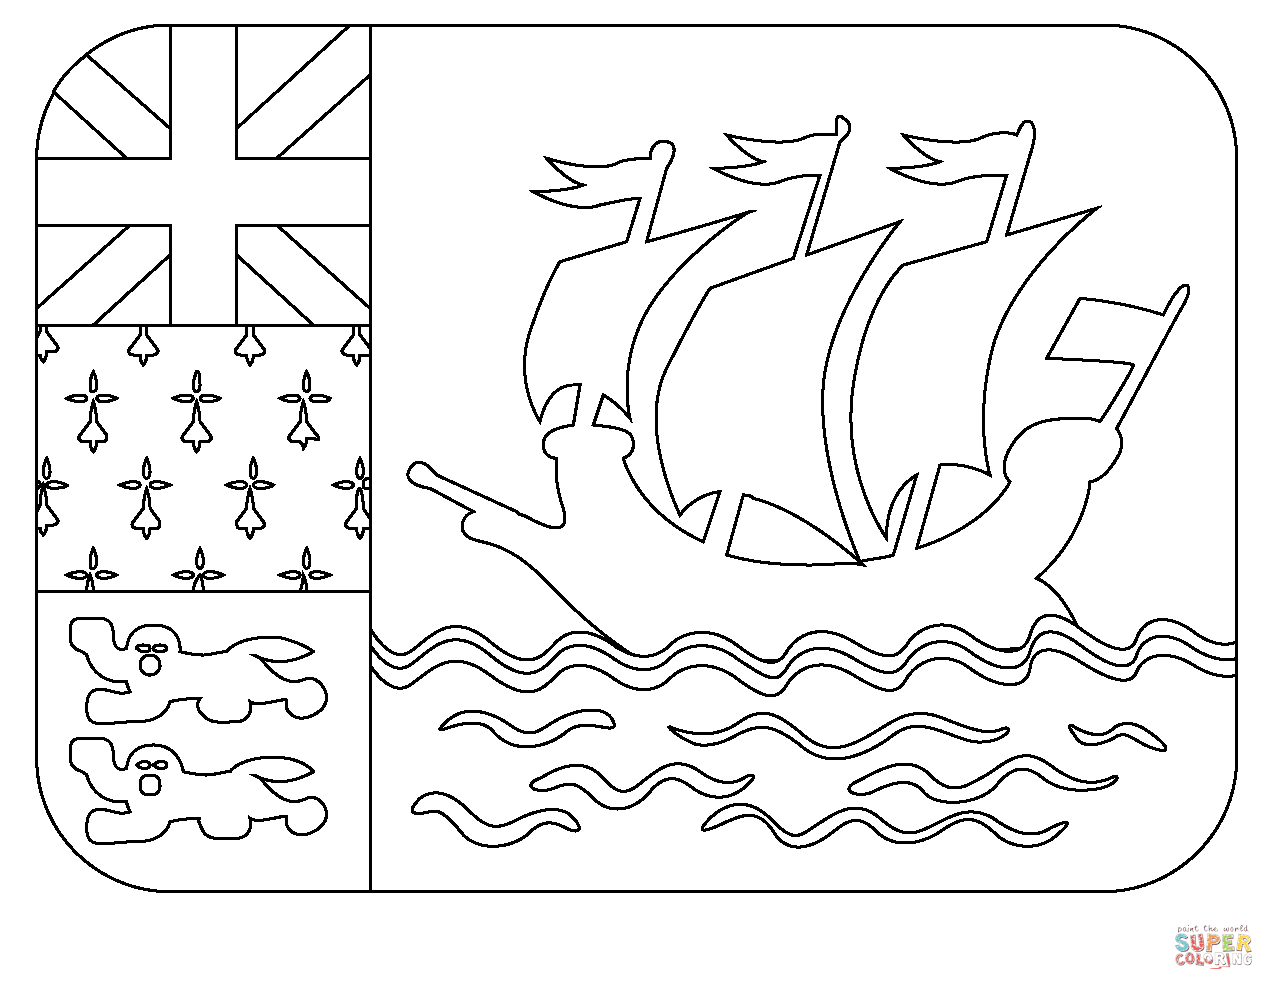 Flag of st pierre miquelon emoji coloring page free printable coloring pages